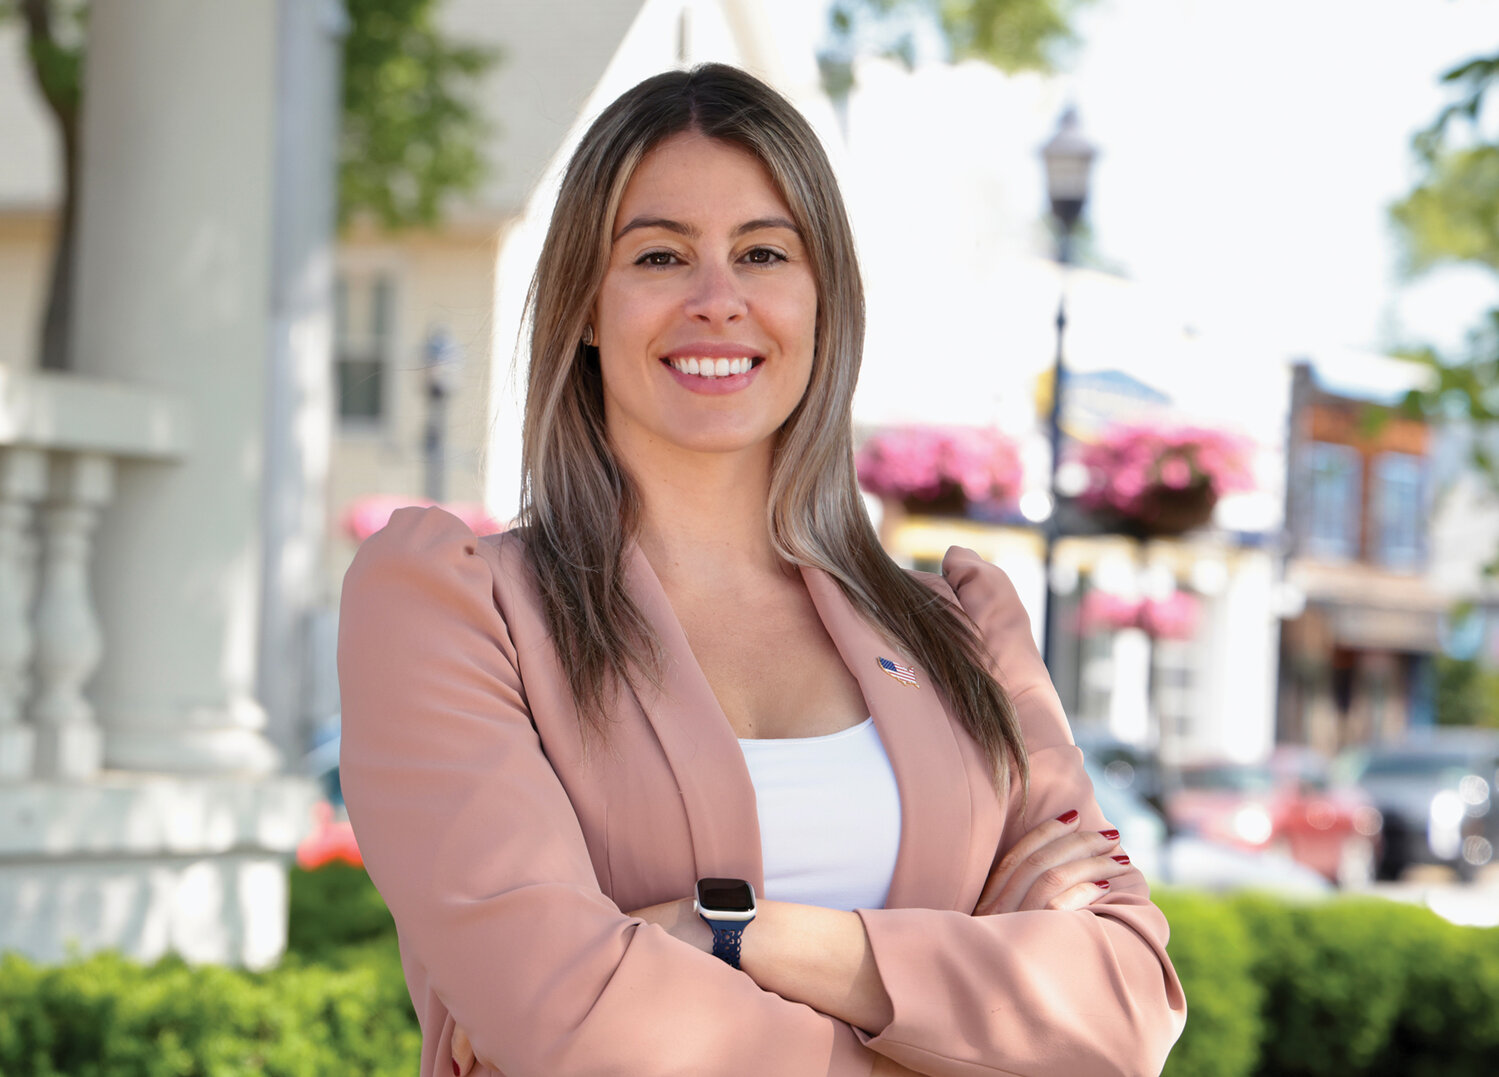 Samantha Goetz might be new to running a race, but she’s not new to government — the kind of experience she hopes to bring as a Nassau County Legislator.